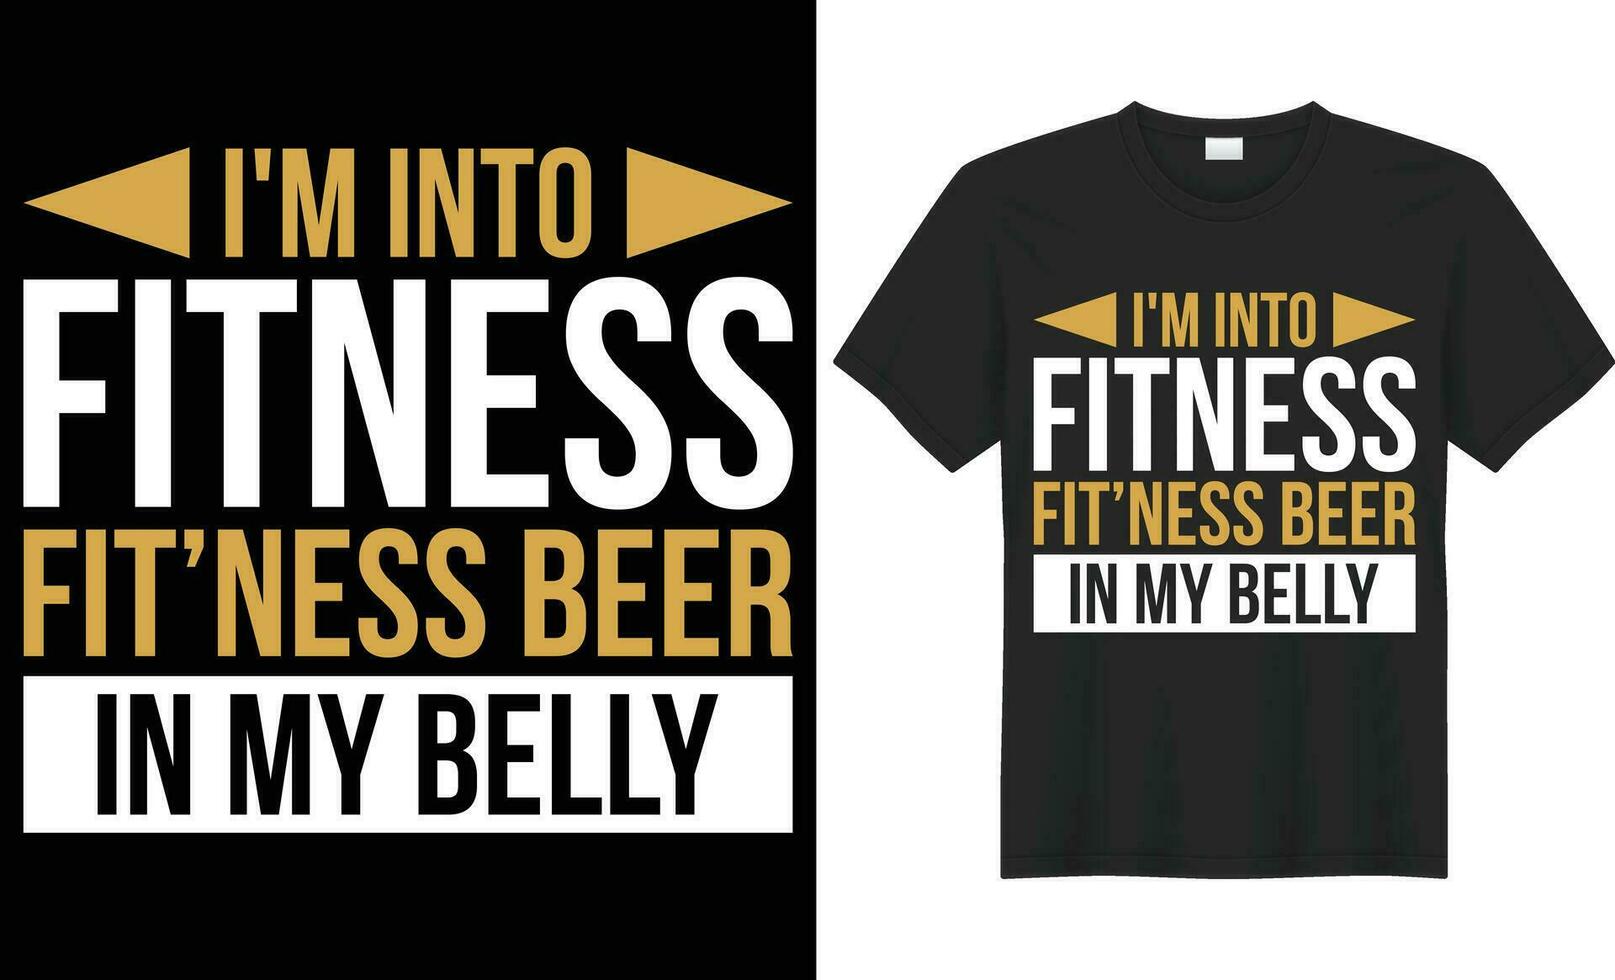 I am into fitness fitness beer in my belly typography vector t-shirt design. Perfect for print item bag, sticker, mug, template, banner. Handwritten vector illustration. Isolated on black background.